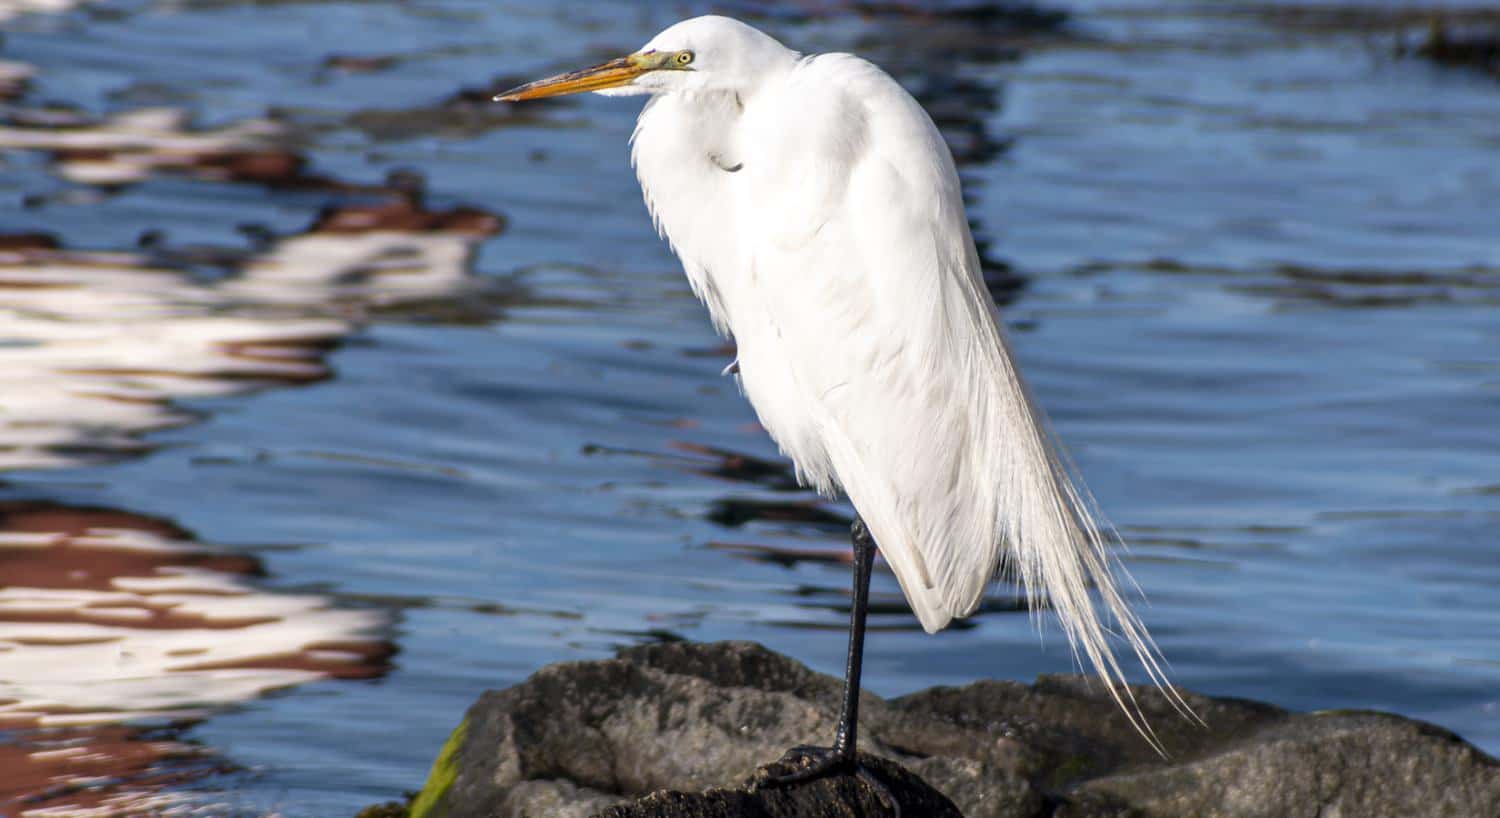 Large white bird with long orange beak standing on rock with water in the background